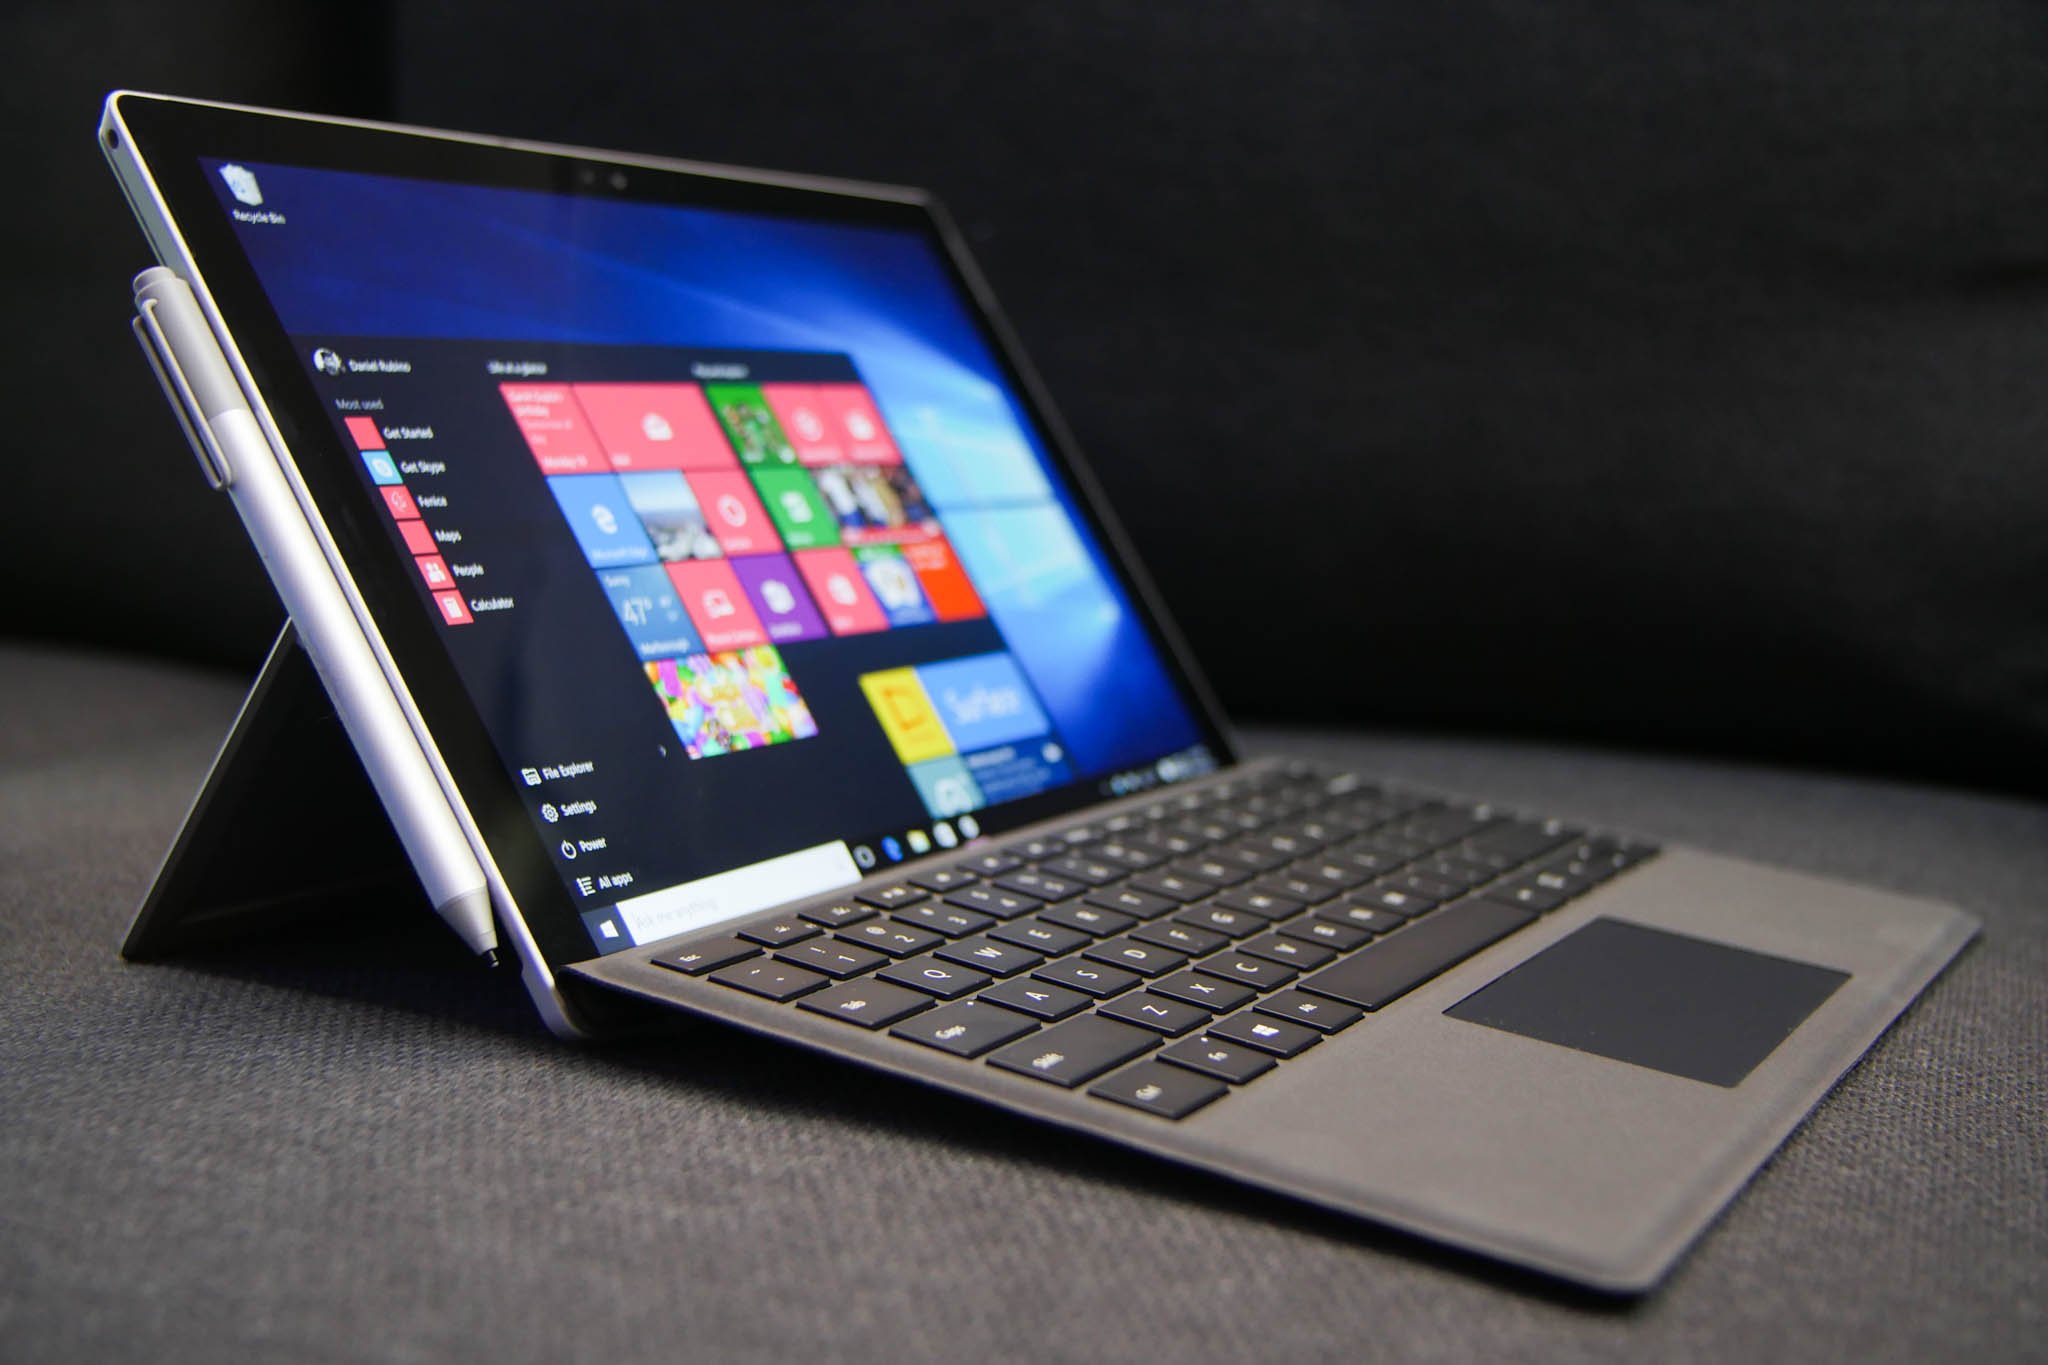 Microsoft Surface Pro 4 review: A refined Surface Pro is still the